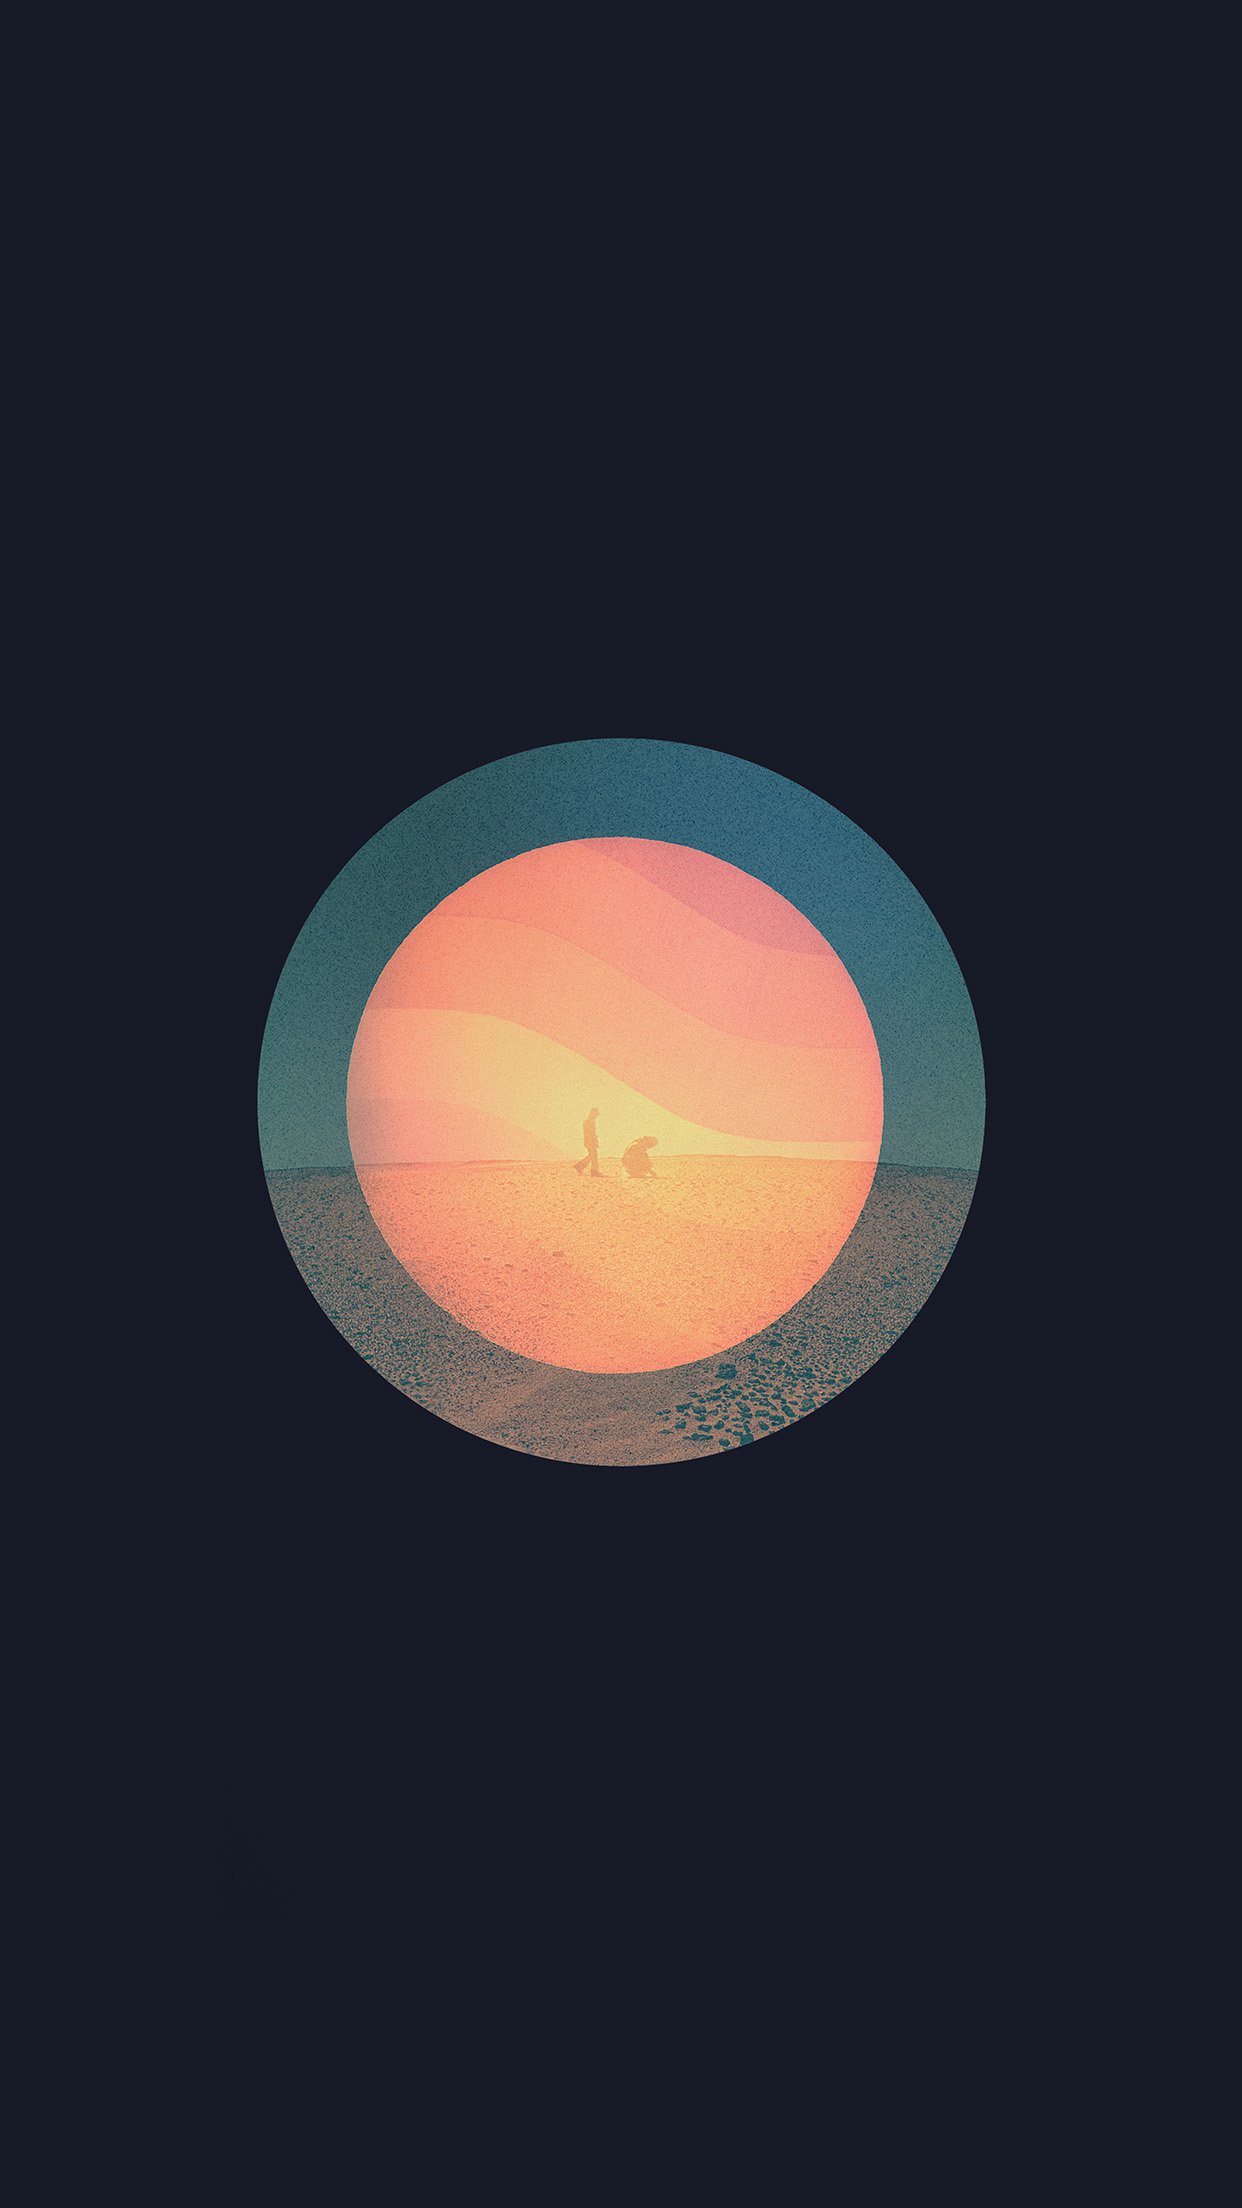 hd music wallpapers for android,orange,sky,circle,atmosphere,illustration